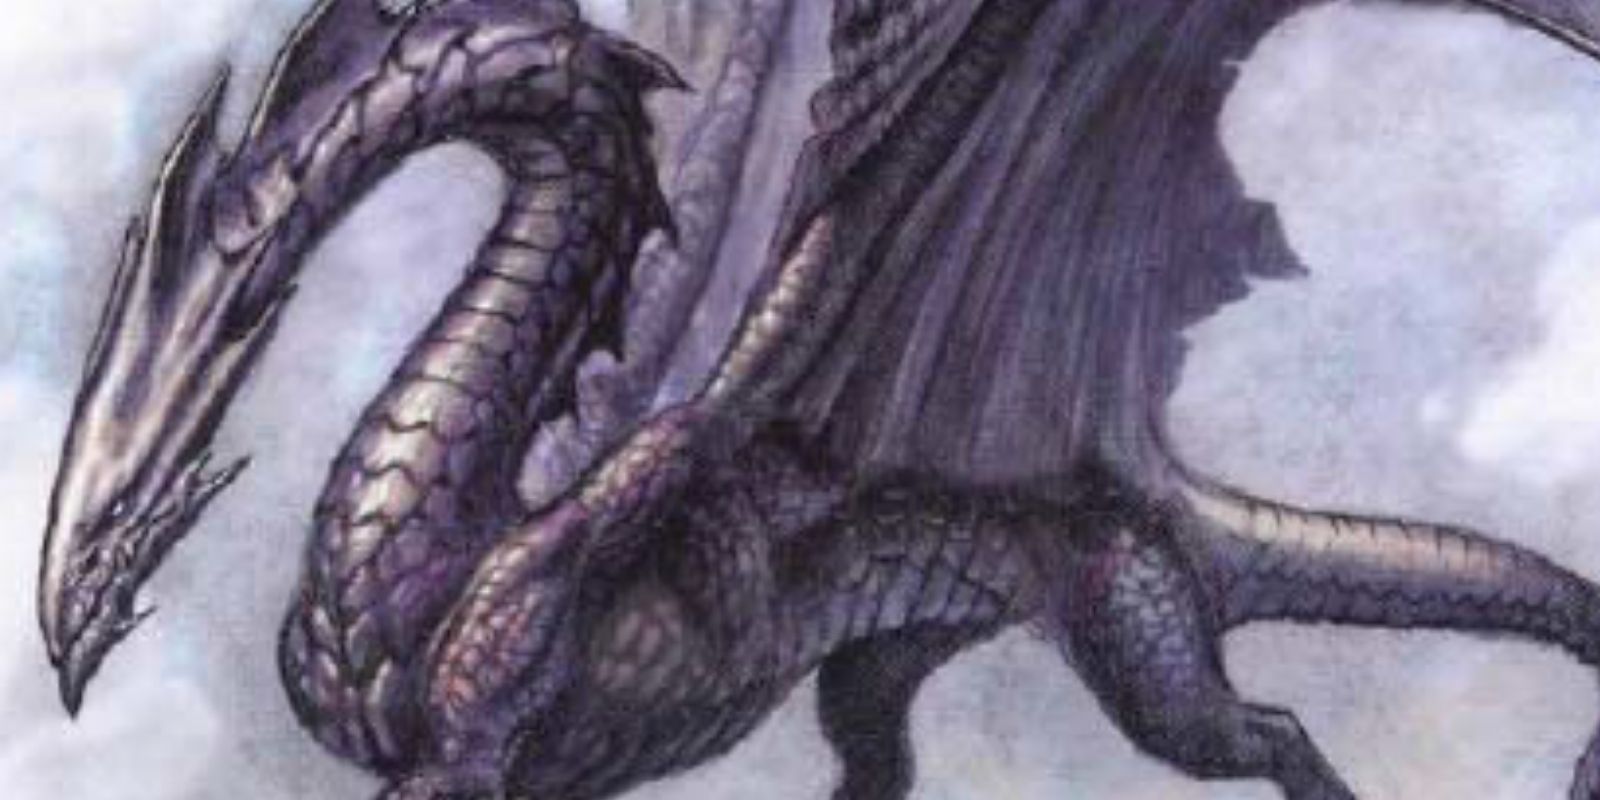 The classic design for the Deep Dragon which appeared in Dungeons and Dragons 3.5 Edition